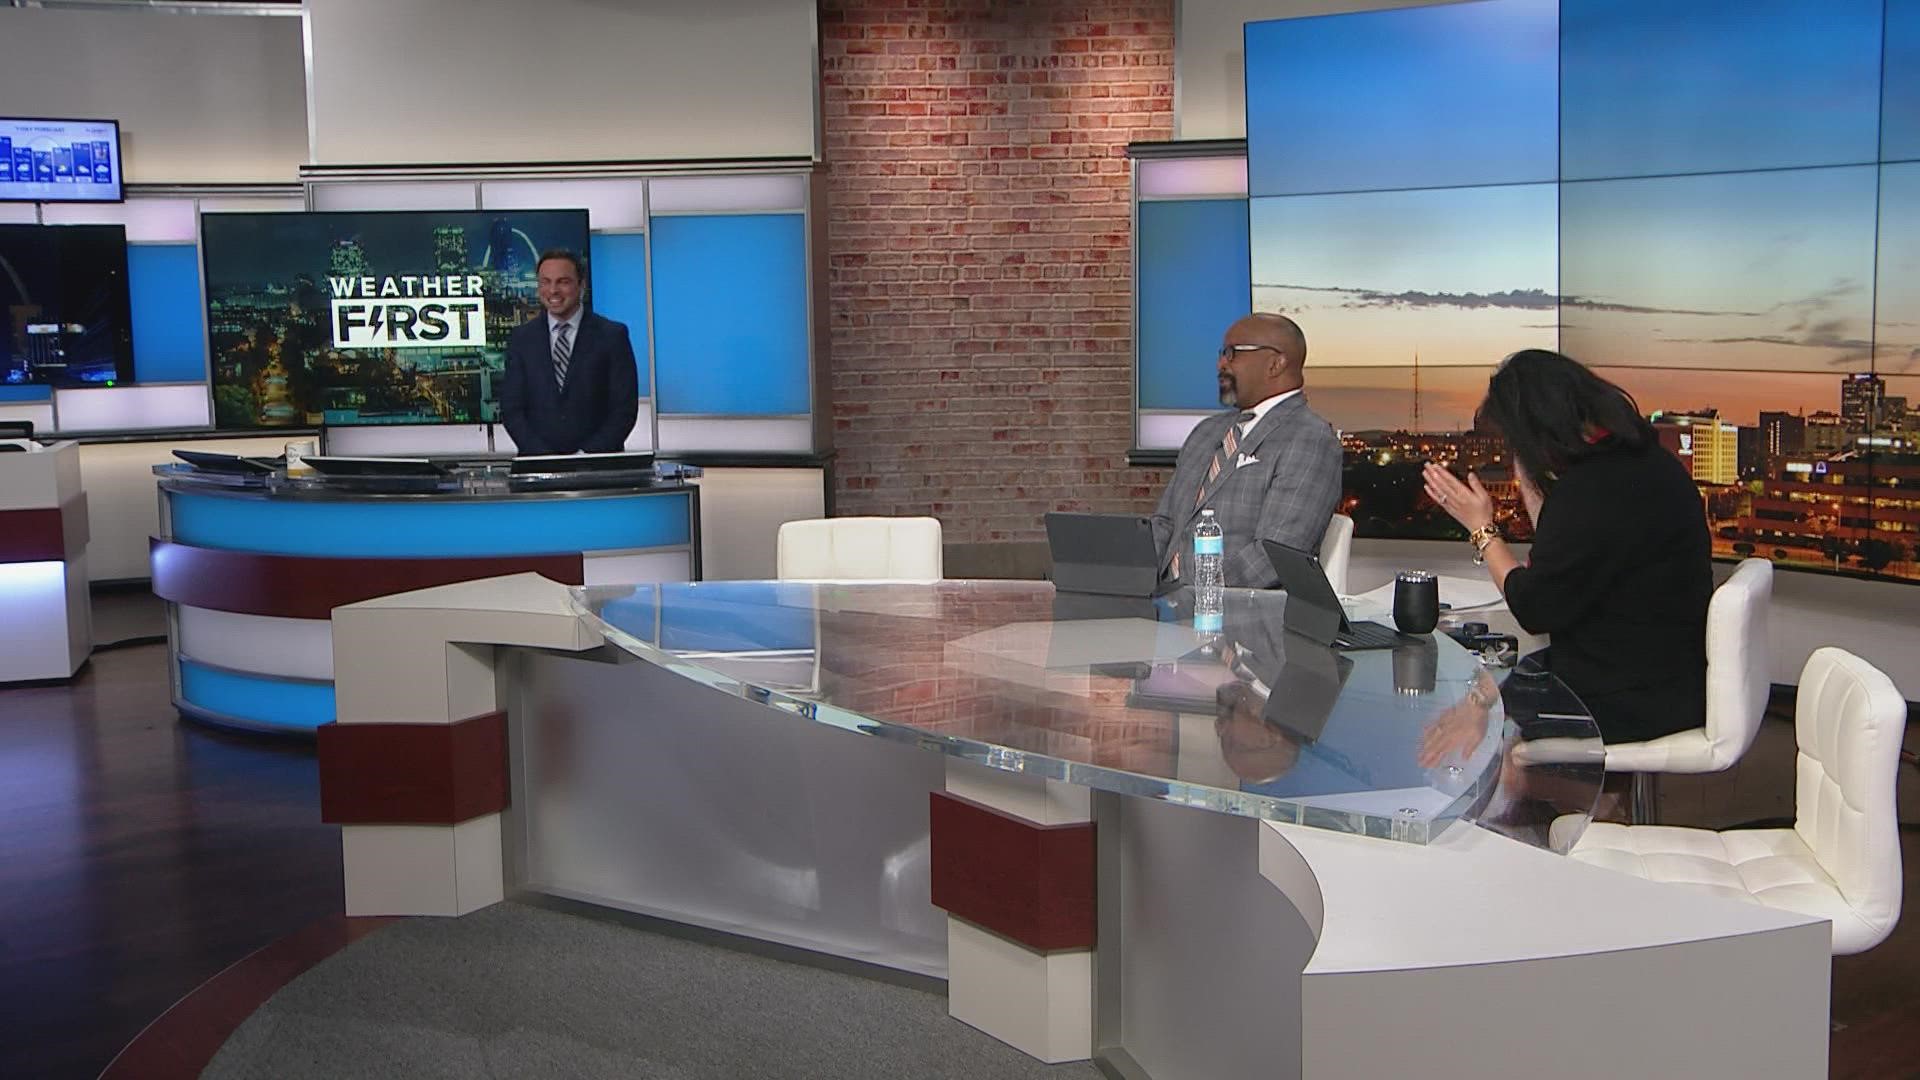 Rene Knott, Michelle Li and Anthony Slaughter talk about the Gateway Arch. The Today in St. Louis anchors joked about the camera shot showing the monument.